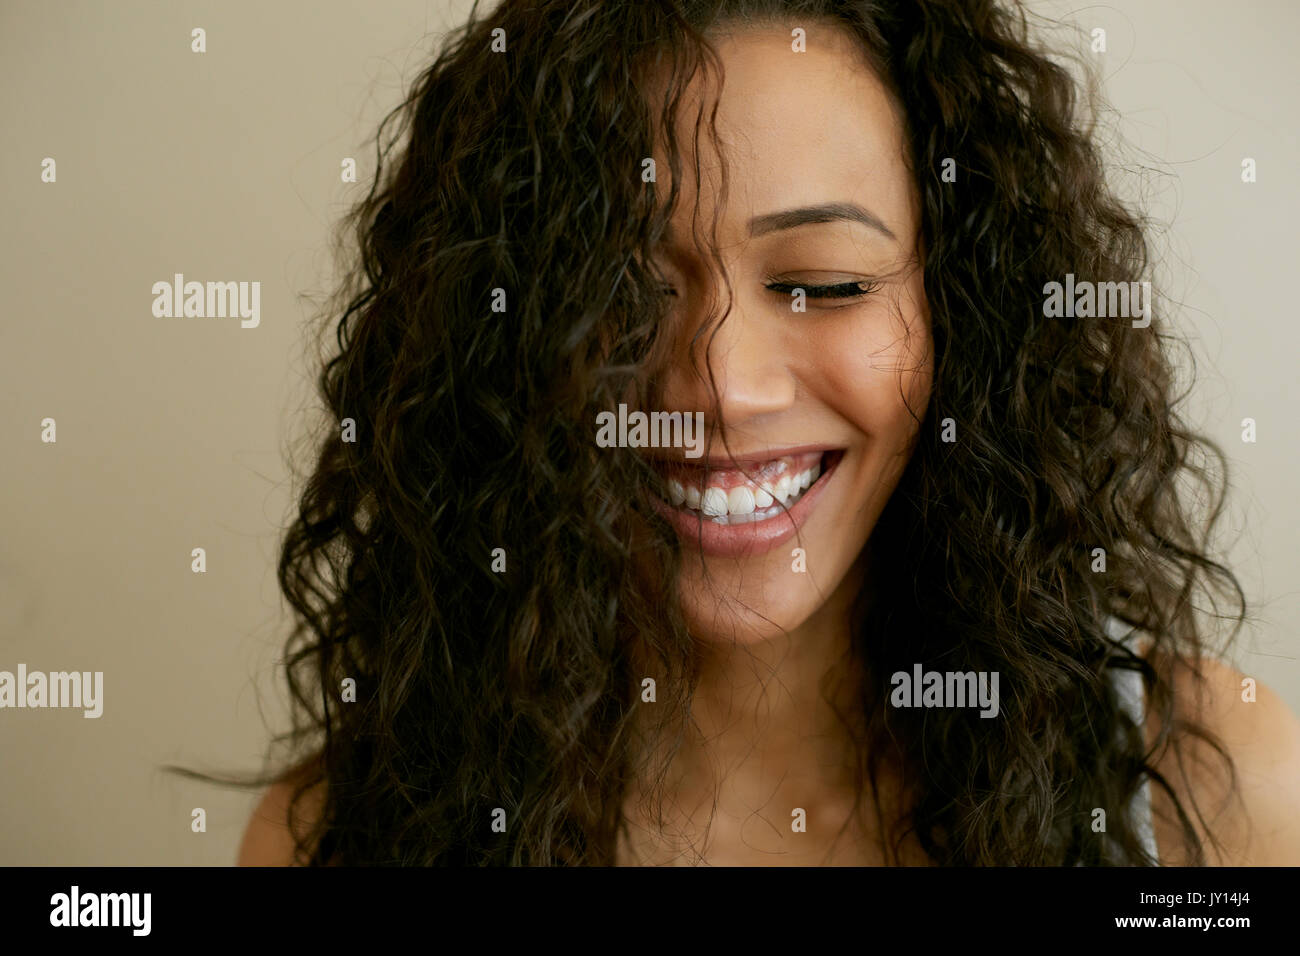 Portrait of laughing Mixed Race woman with eyes closed Stock Photo